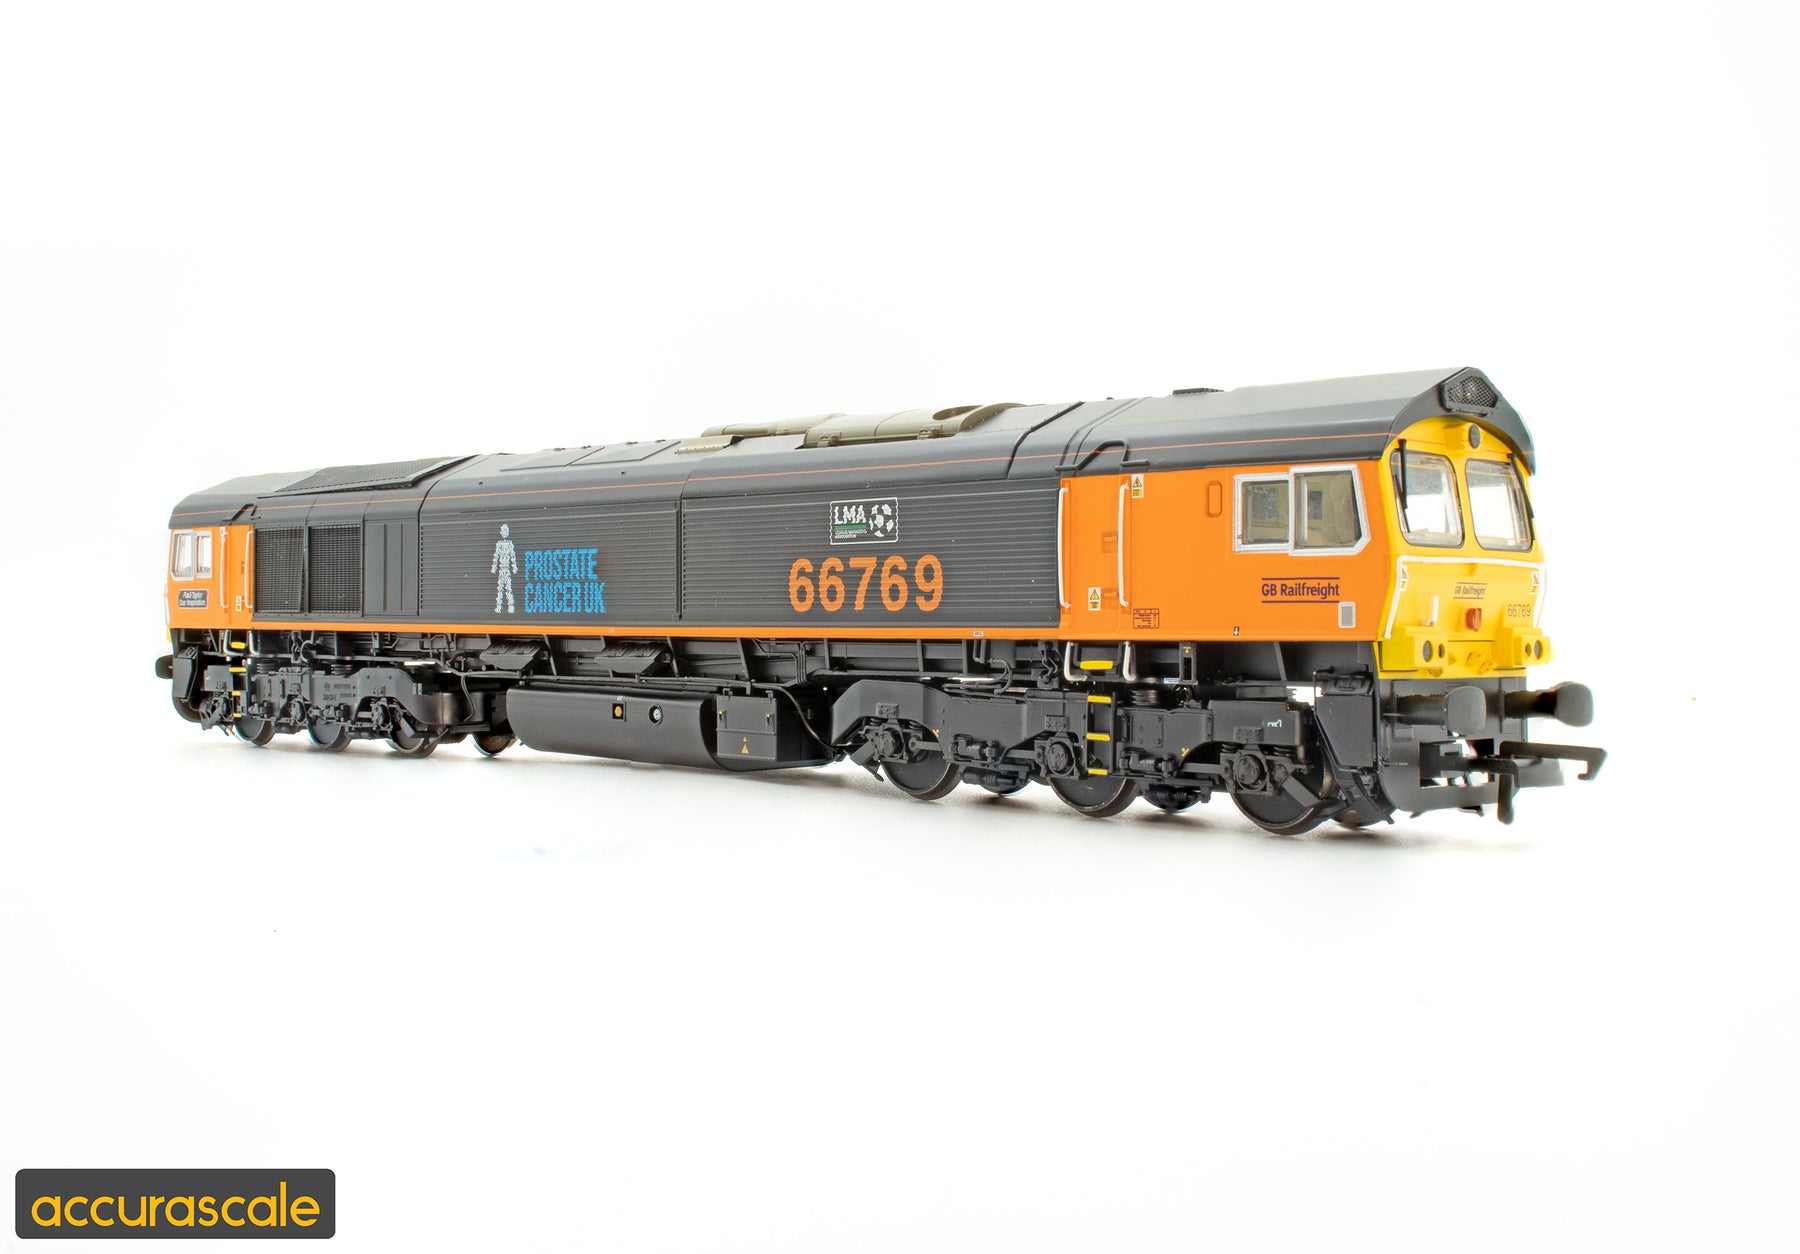 accurascale Aims To Raise £10,000 for Prostate Cancer UK Through Exclusive Class 66 Model